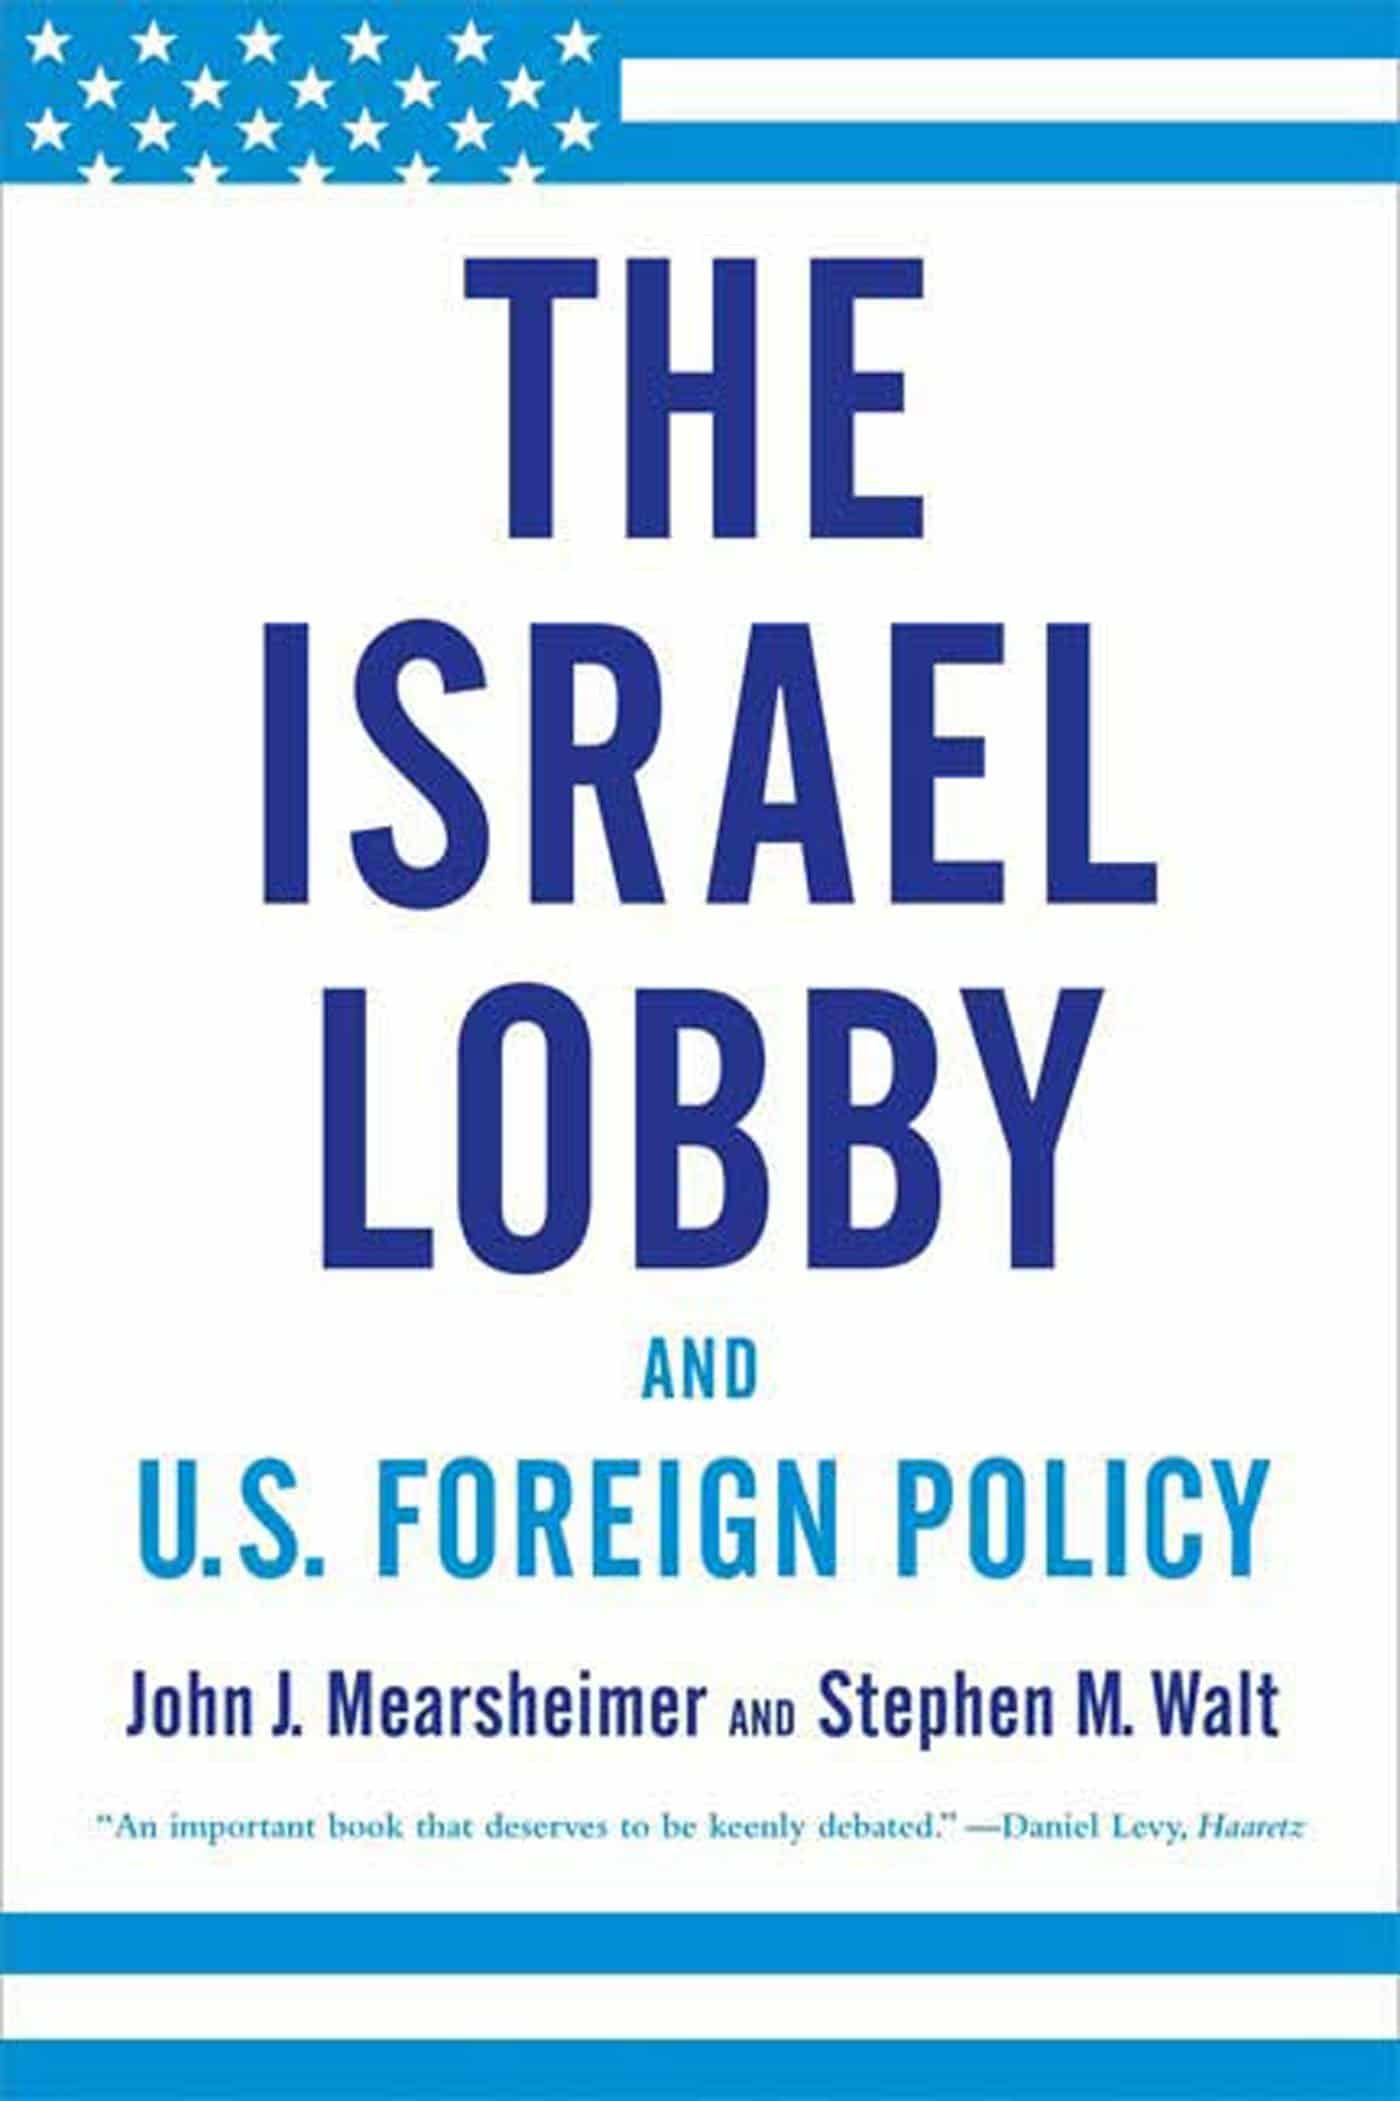 Front Cover of "The Israel Lobby and US foreign Policy".